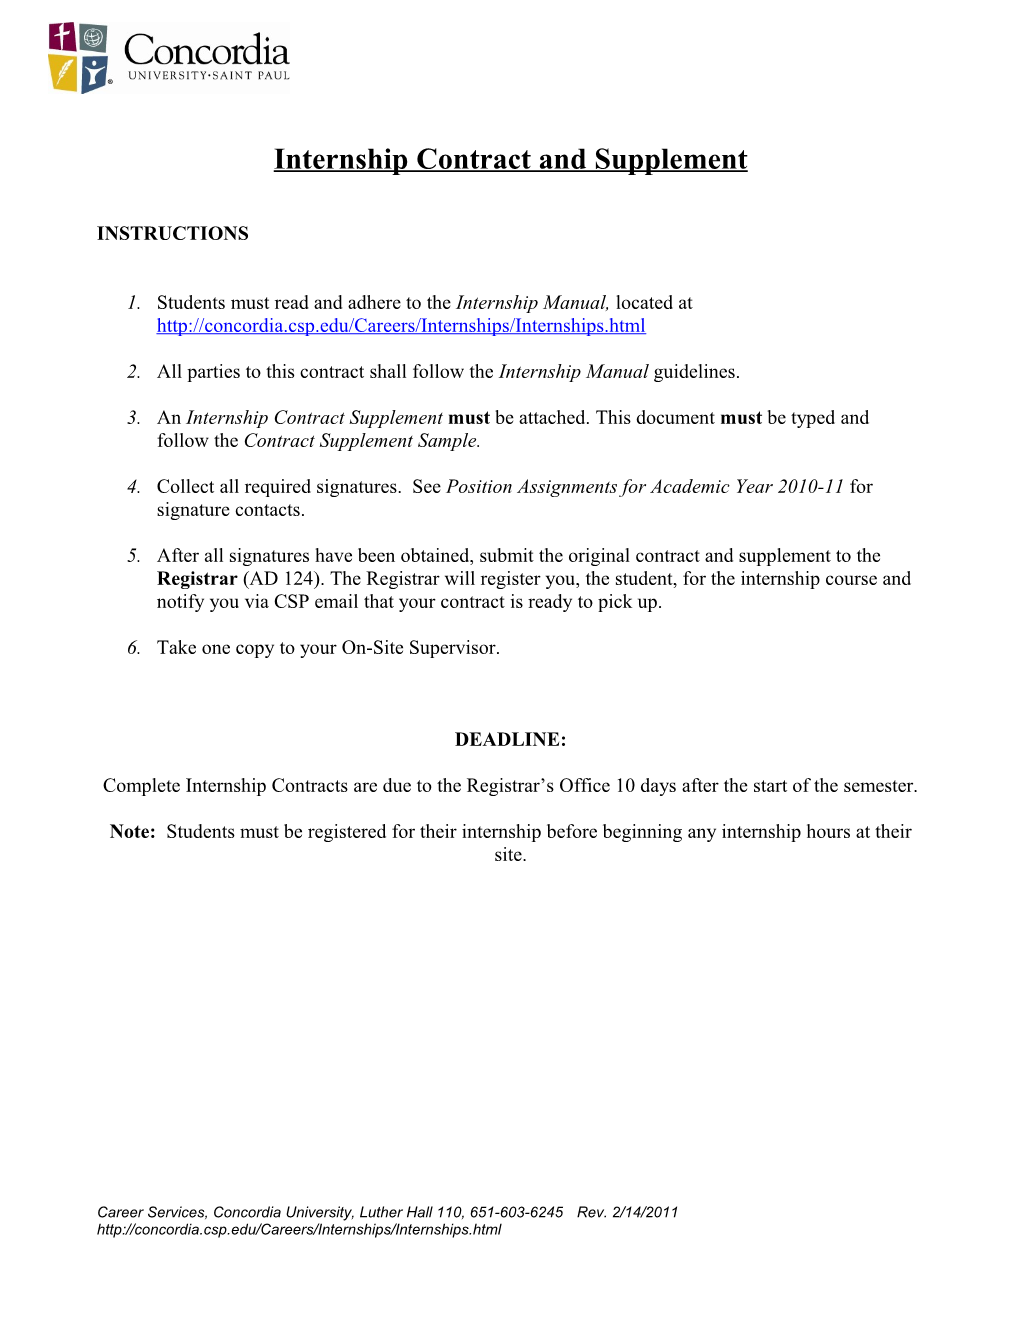 INTERNSHIP CONTRACT: to Be Filled out by Student Working with the On-Site Supervisor